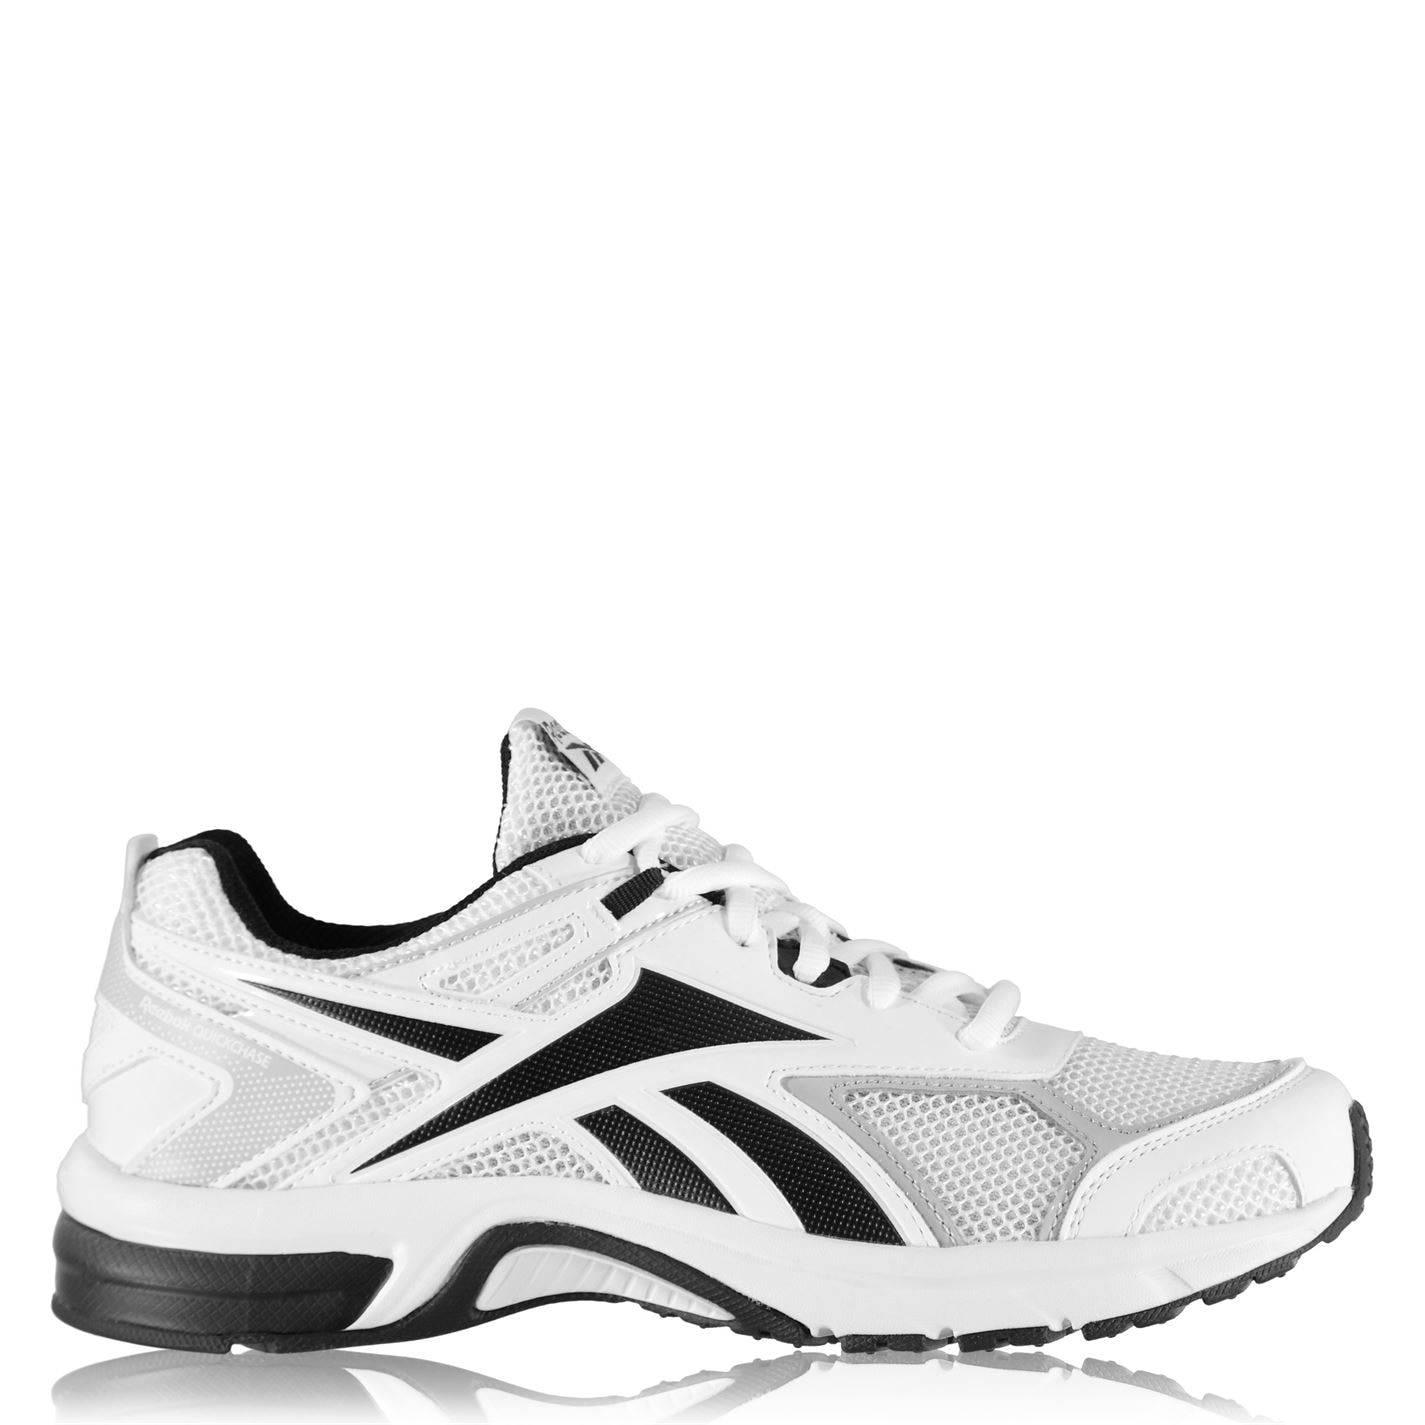 Reebok Quick Chase Running Shoes